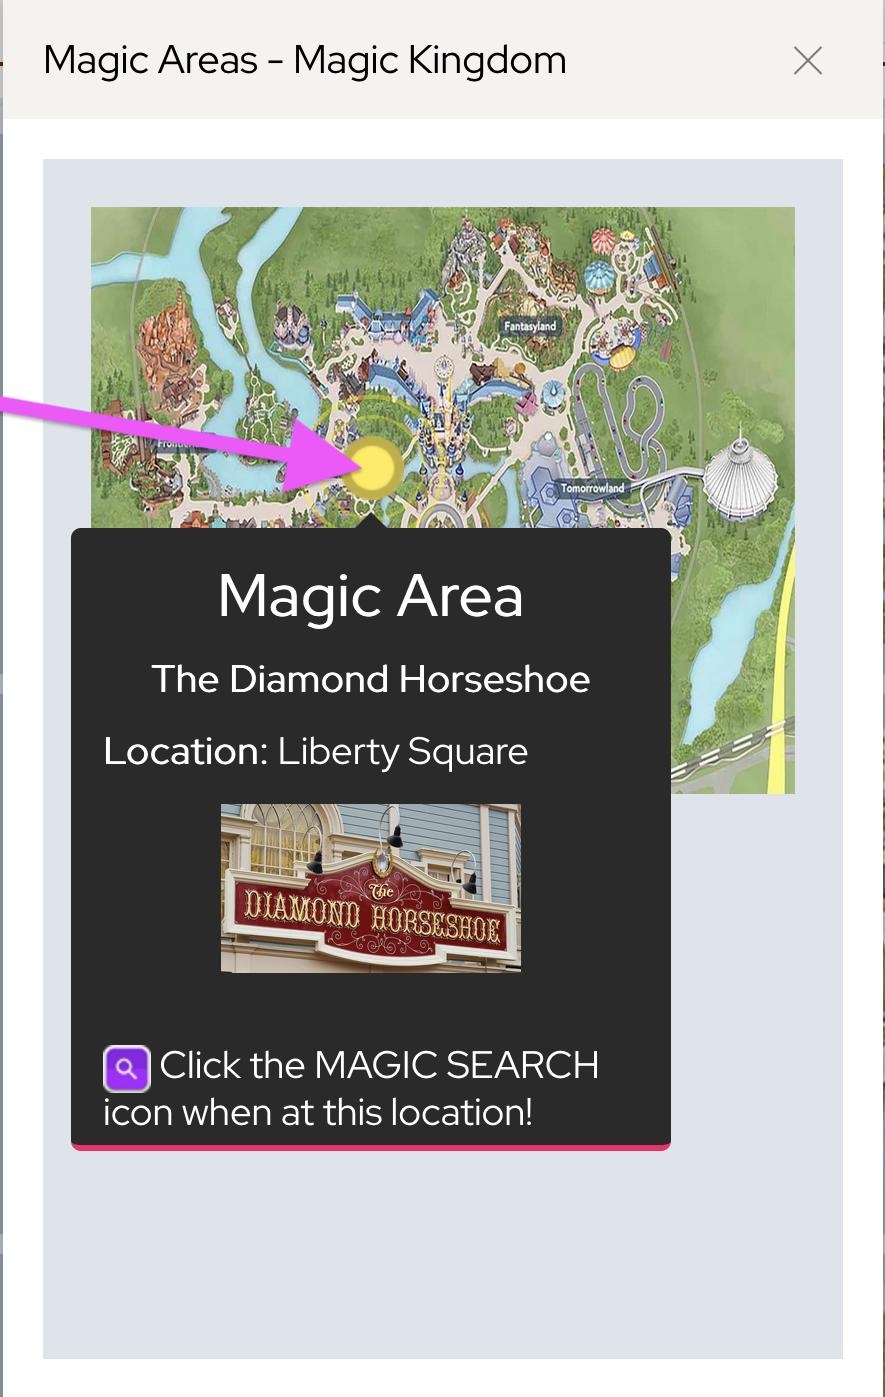 <img src="/images/search_icon_48.png"> Magic Search